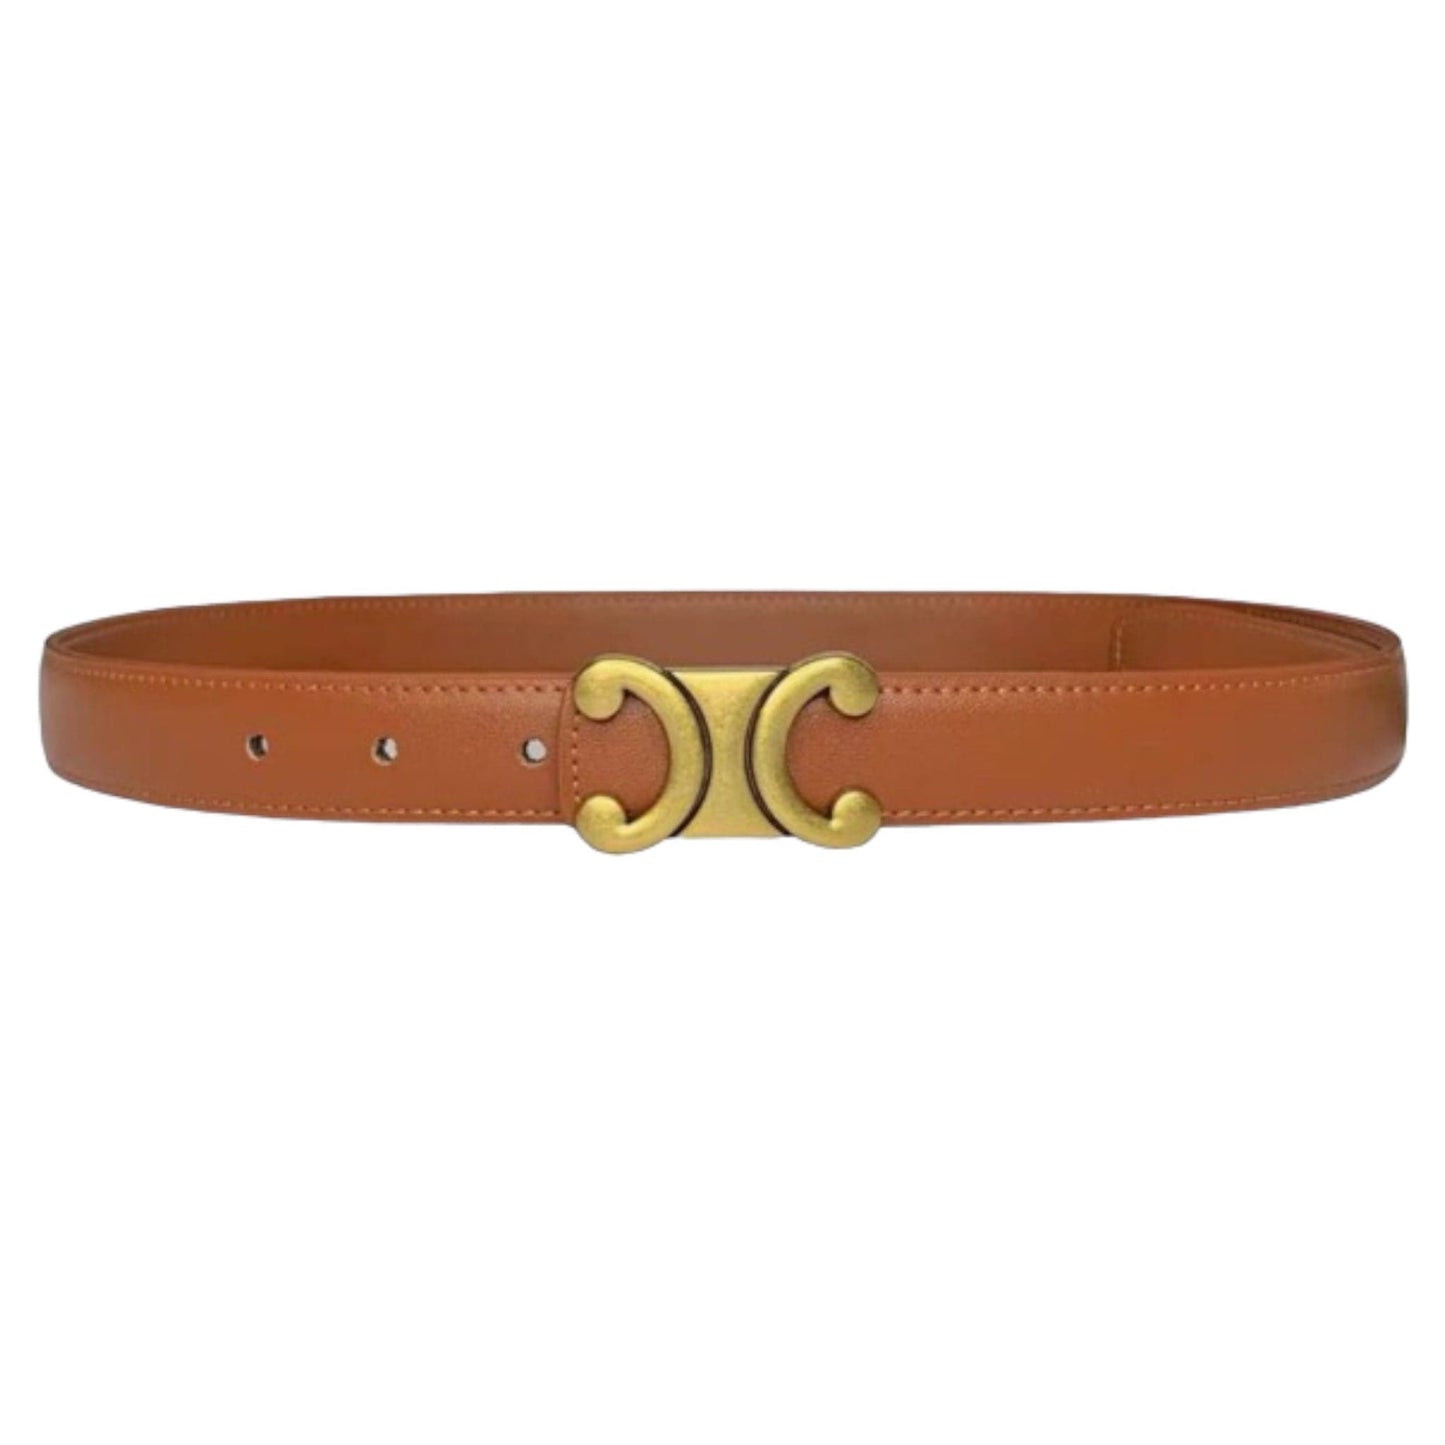 Salina Belt Available in Saddle, White and Black